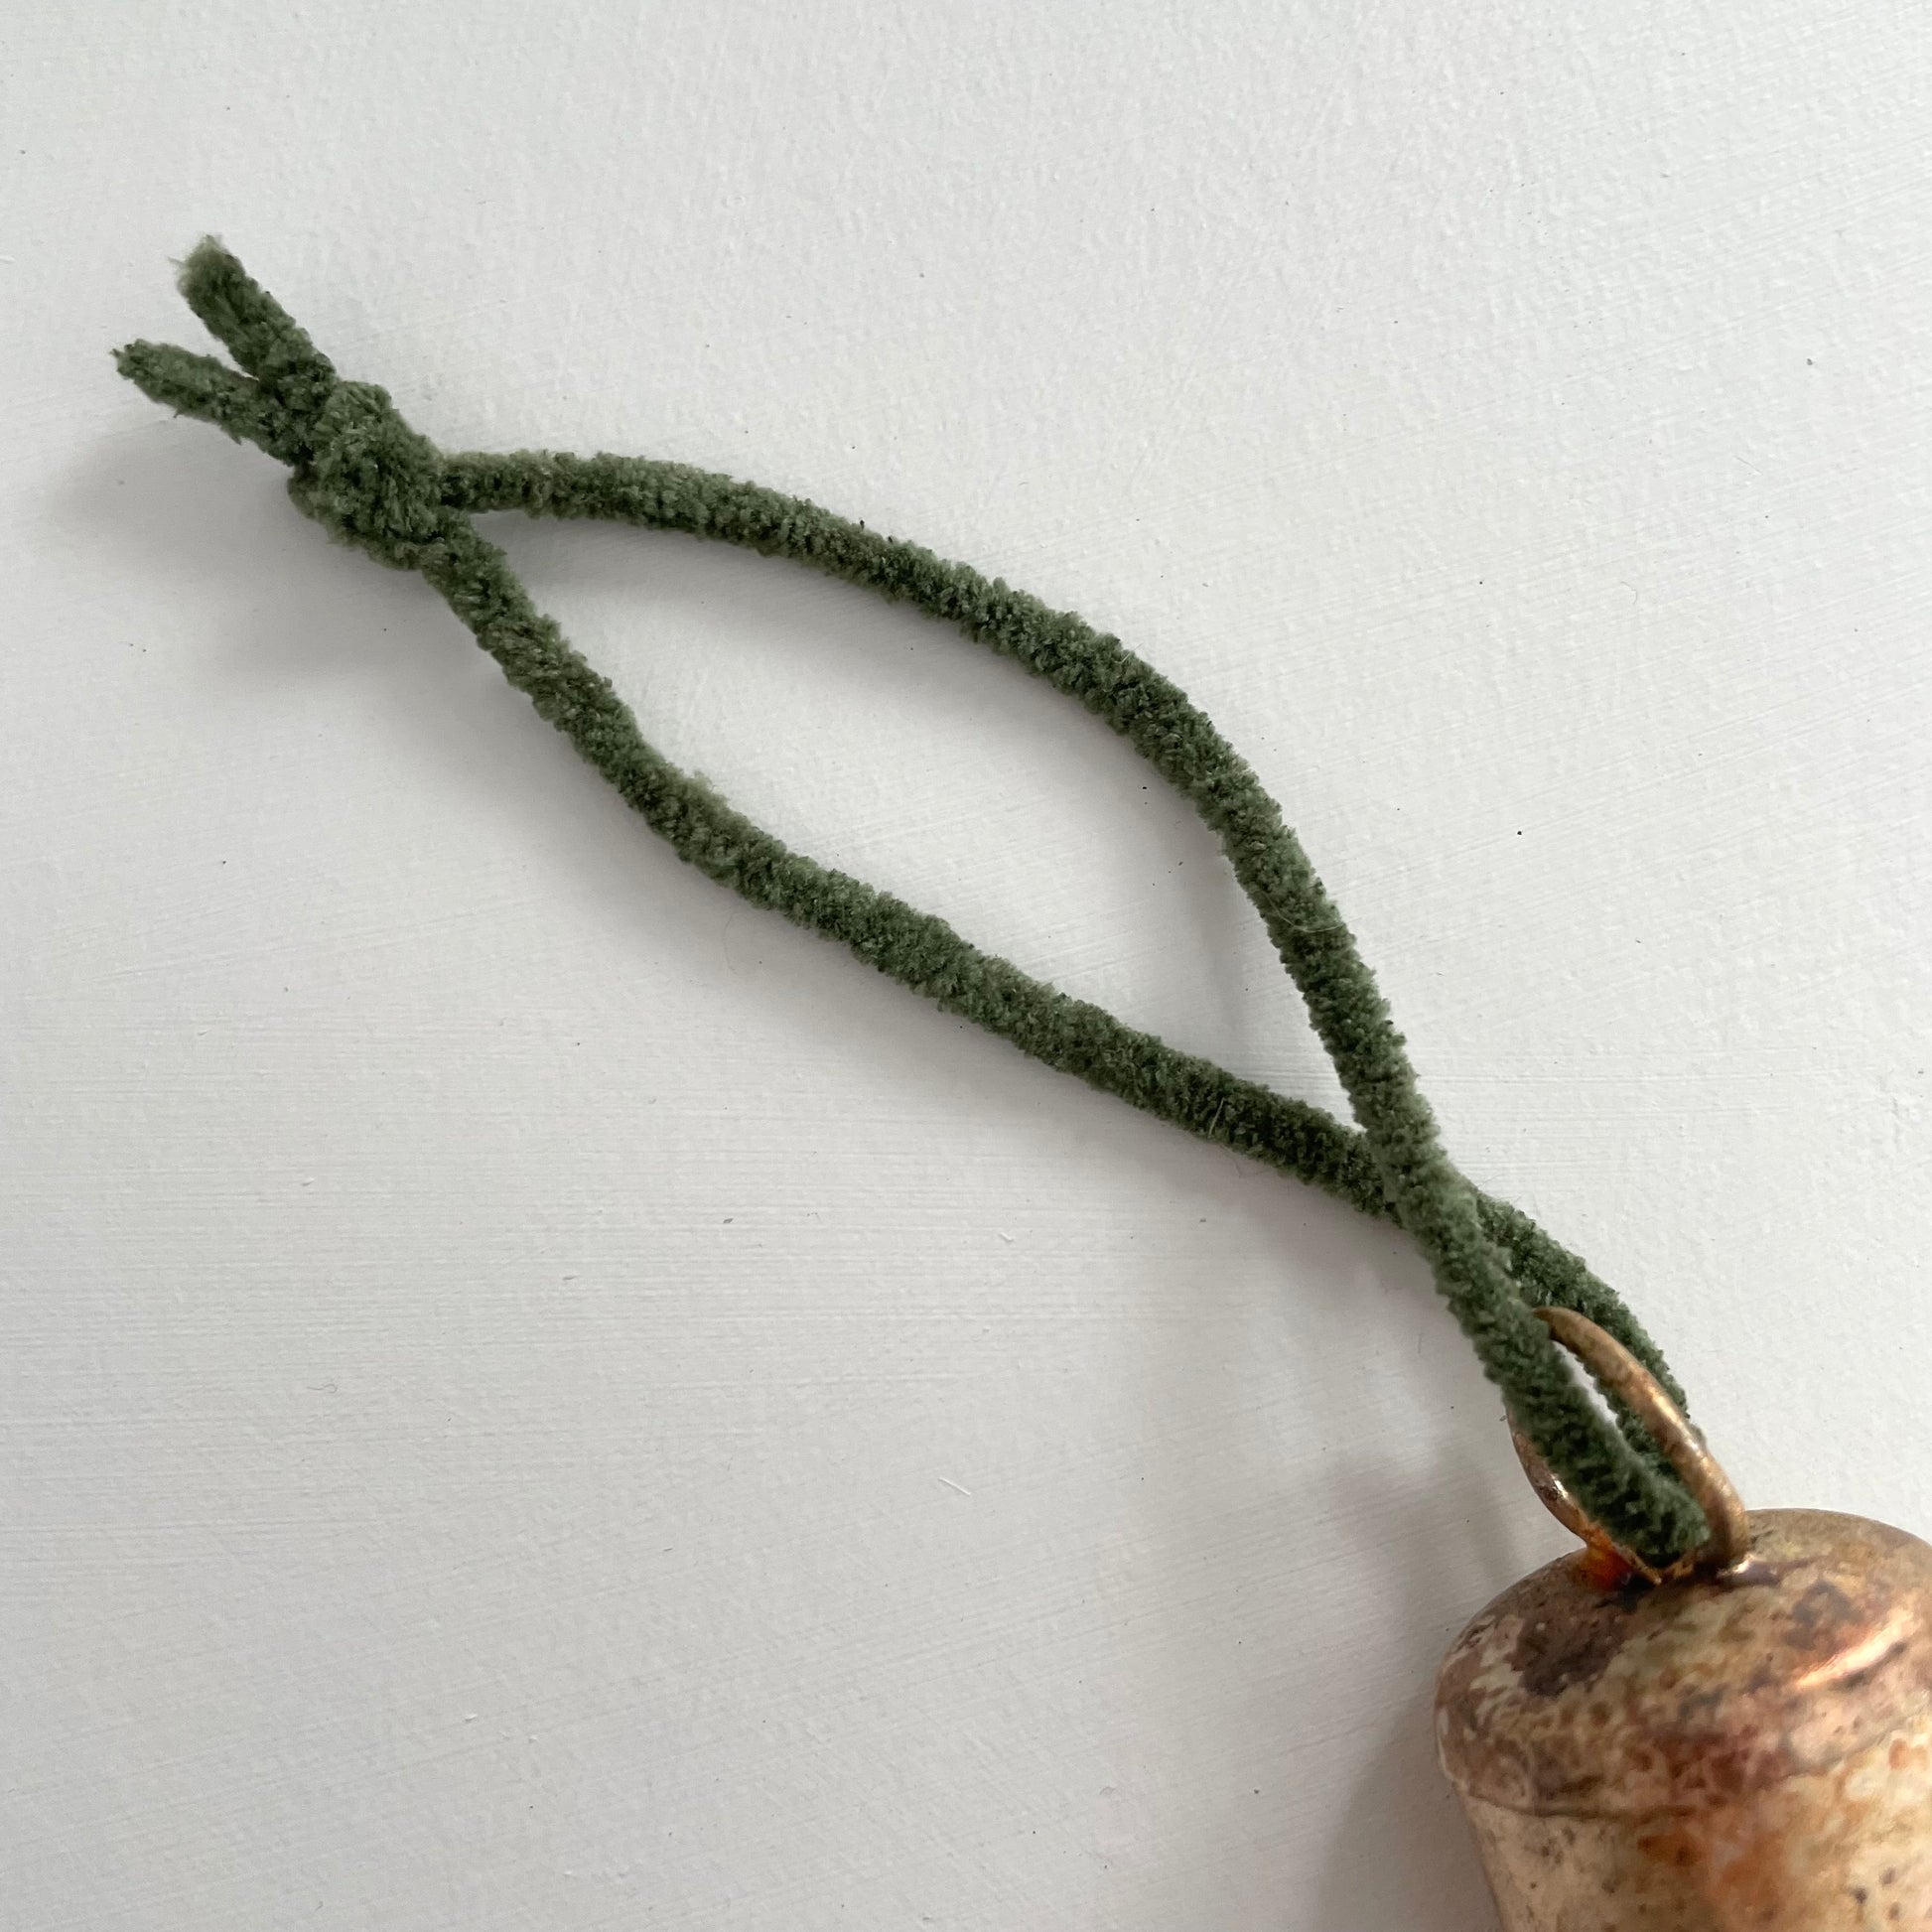 1 3/4 inch flat top tin bell with brass finish strung on twine suede and jute to make an ornament with hunter green suede cord